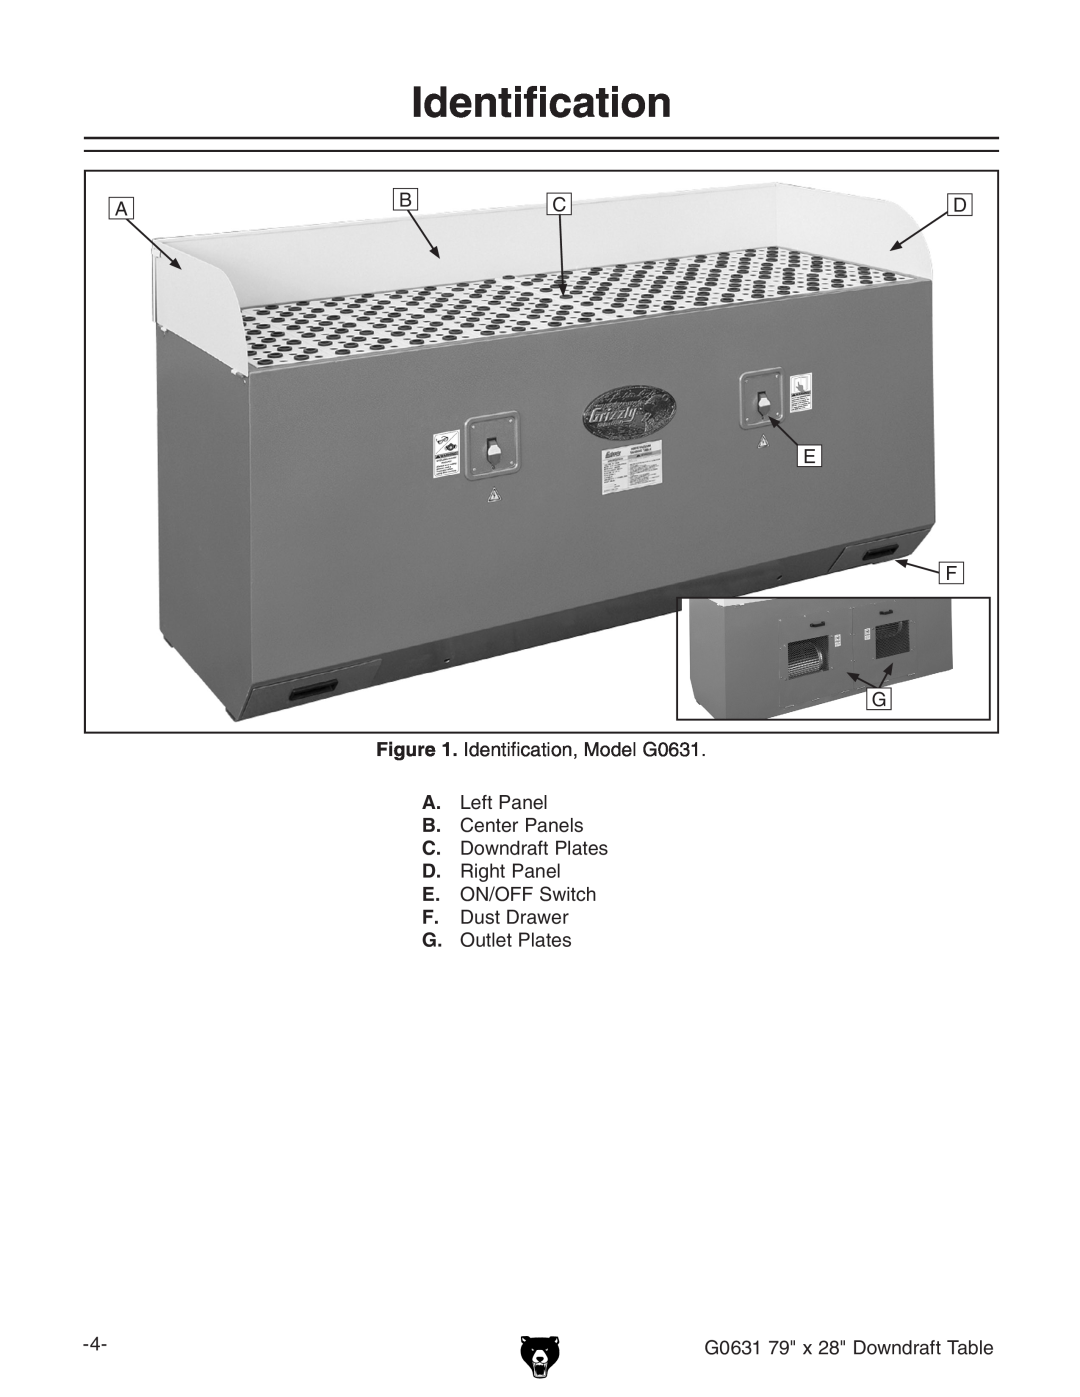 Grizzly owner manual D E F G, Identification, Model G0631 A. Left Panel B. Center Panels, G. Outlet Plates 